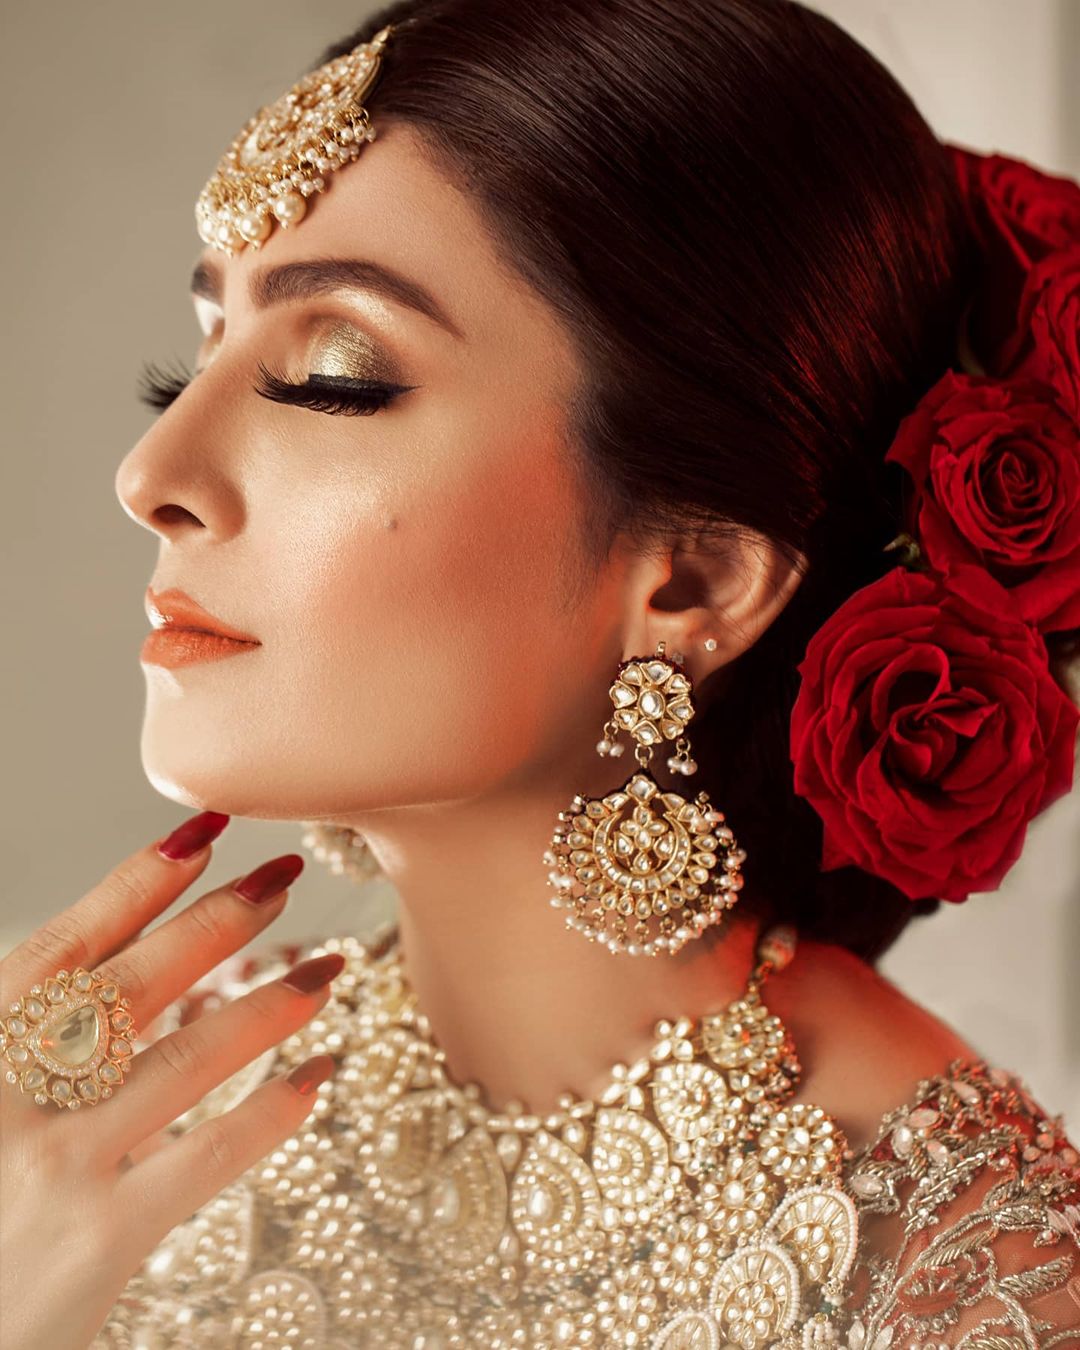 Ayeza Khan Nails Eloquent Charm In her Latest Bridal Shoot